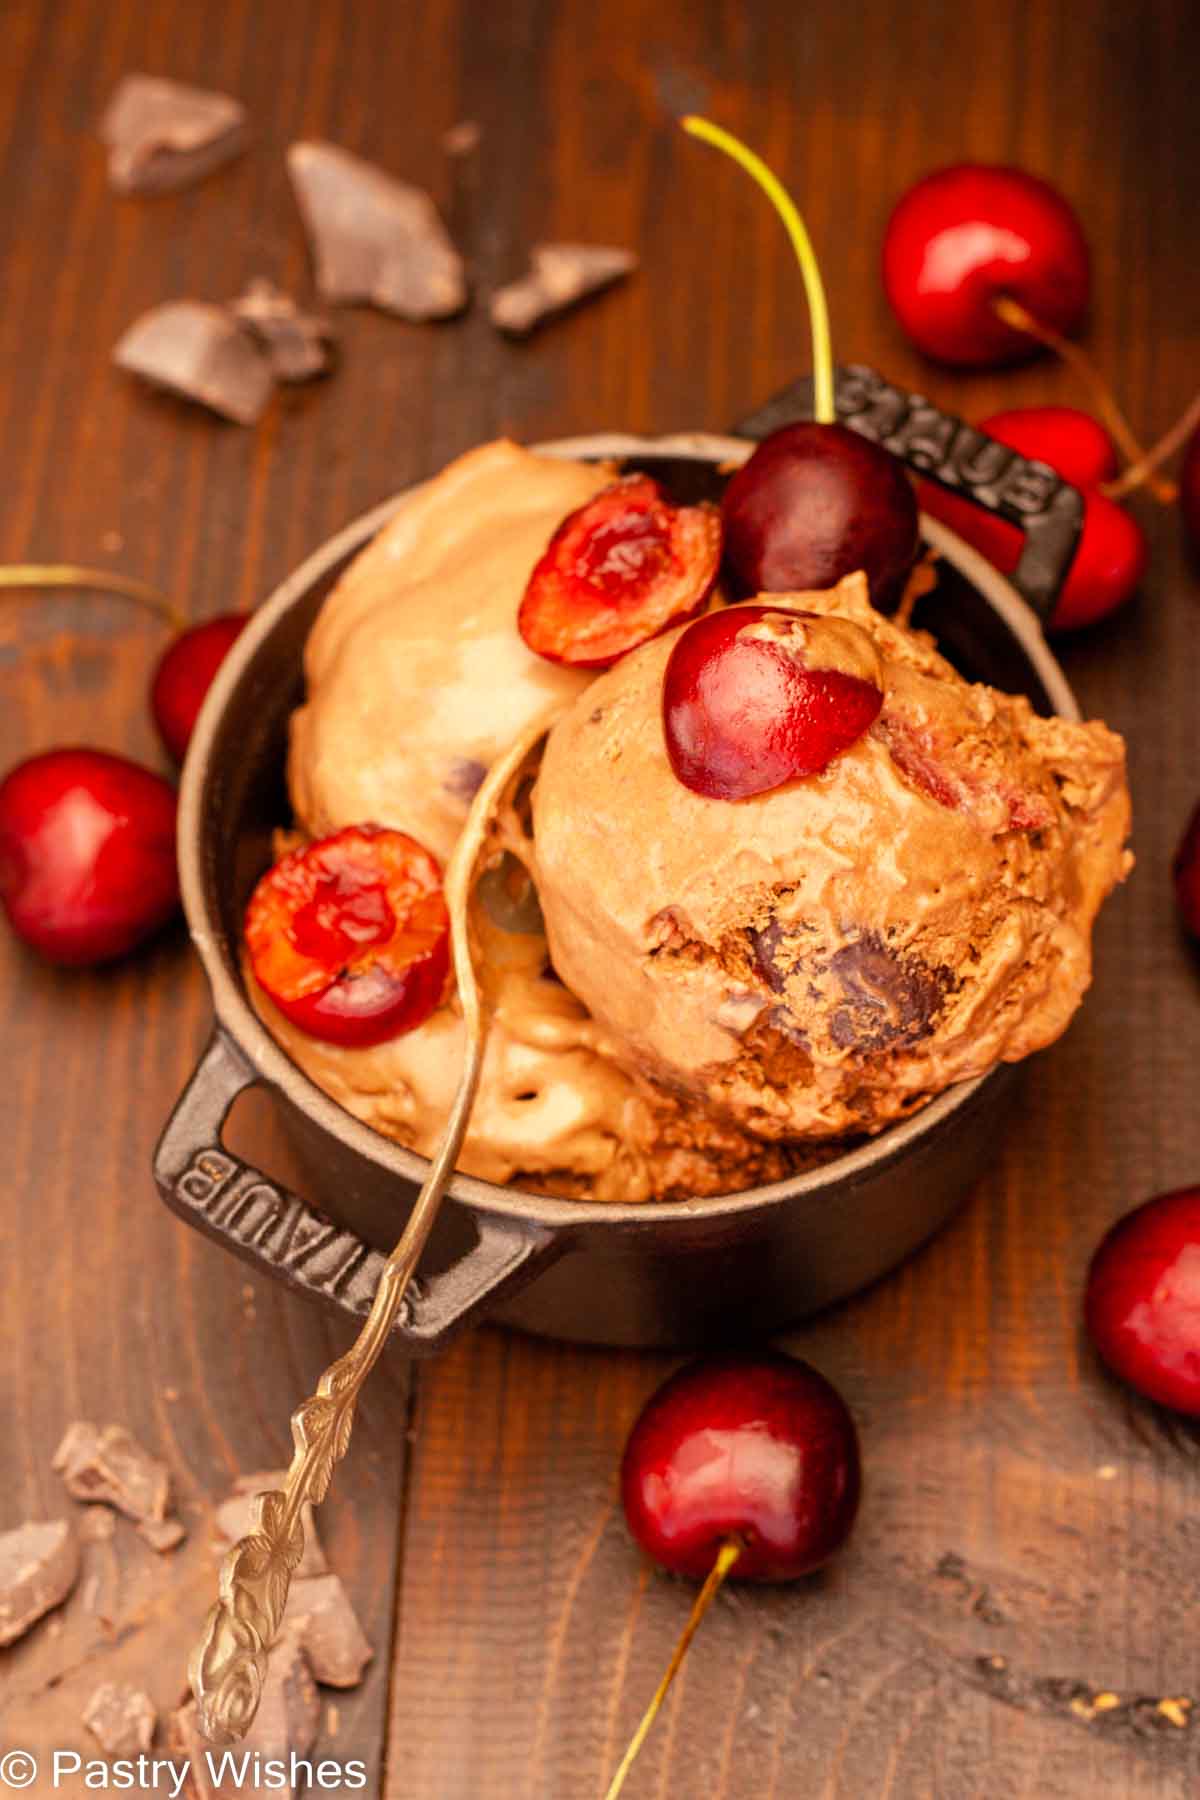 Black forest ice cream topped with cherries in a black bowl on a wooden surface next to cherries and chocolate pieces.